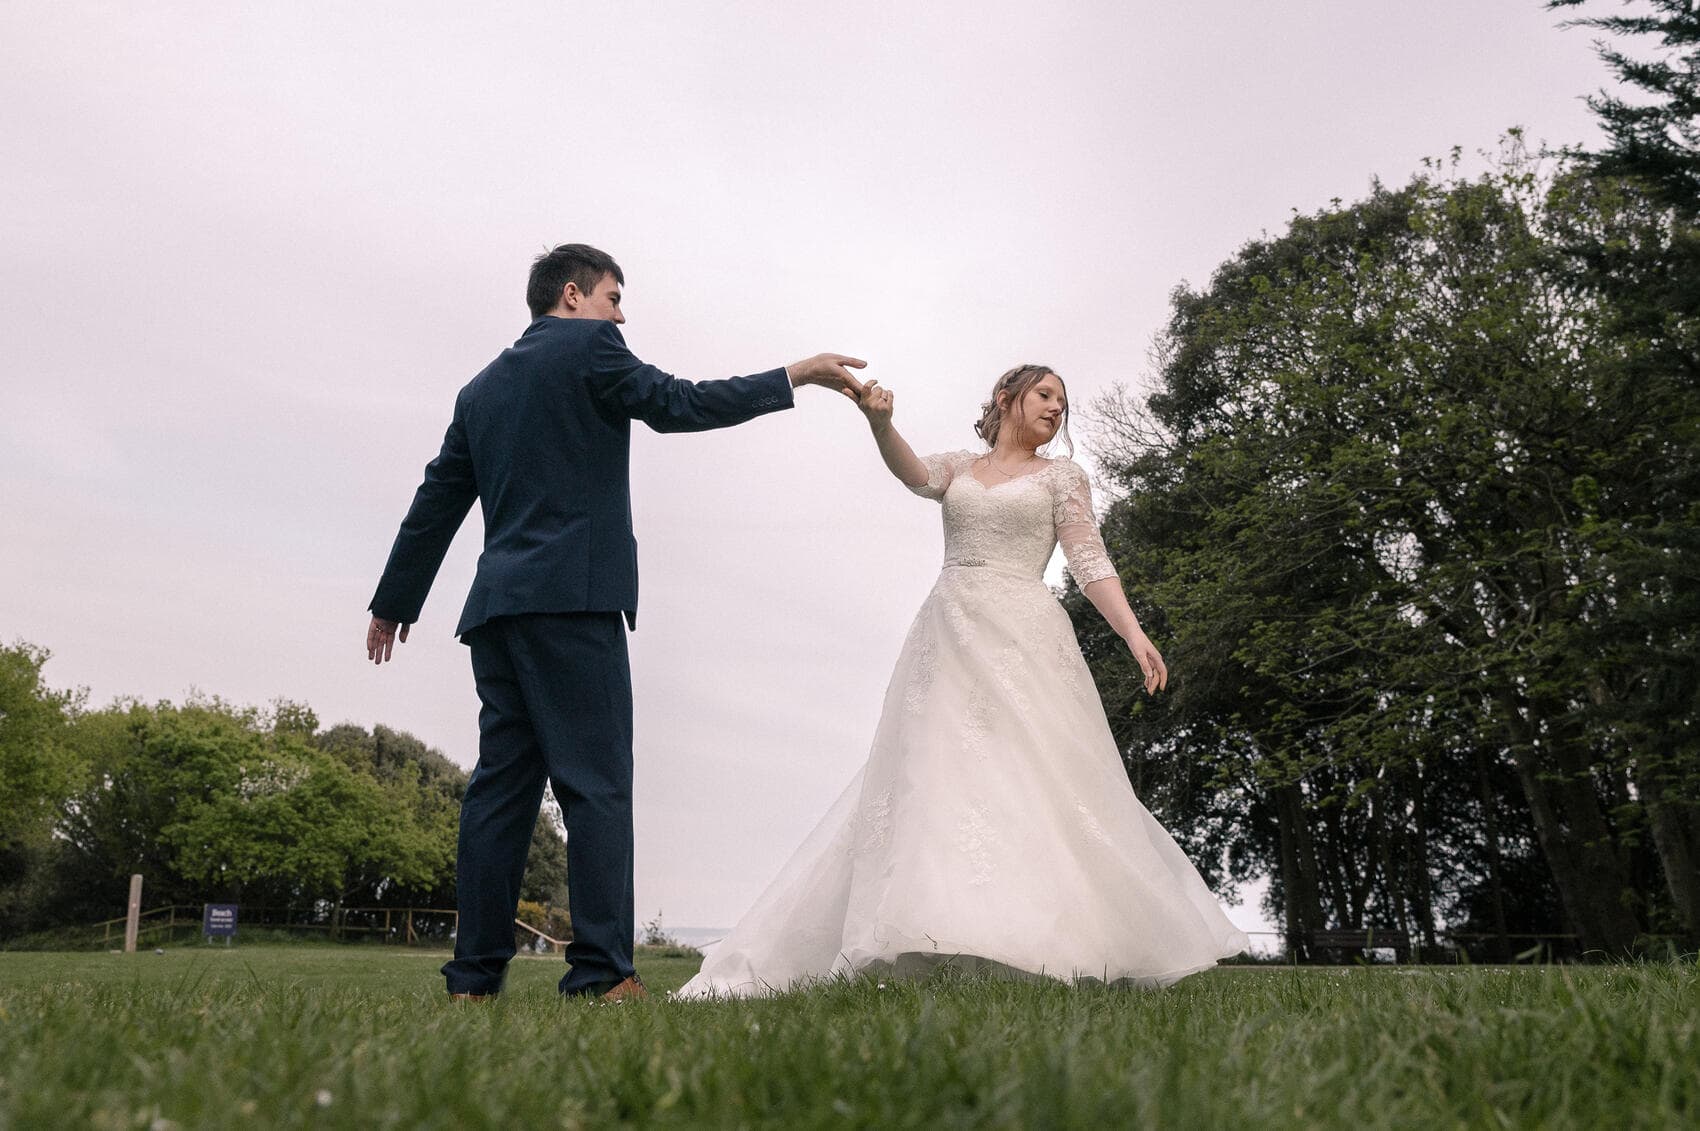 Bride and groom dance on the lawn of Highcliffe castle wedding